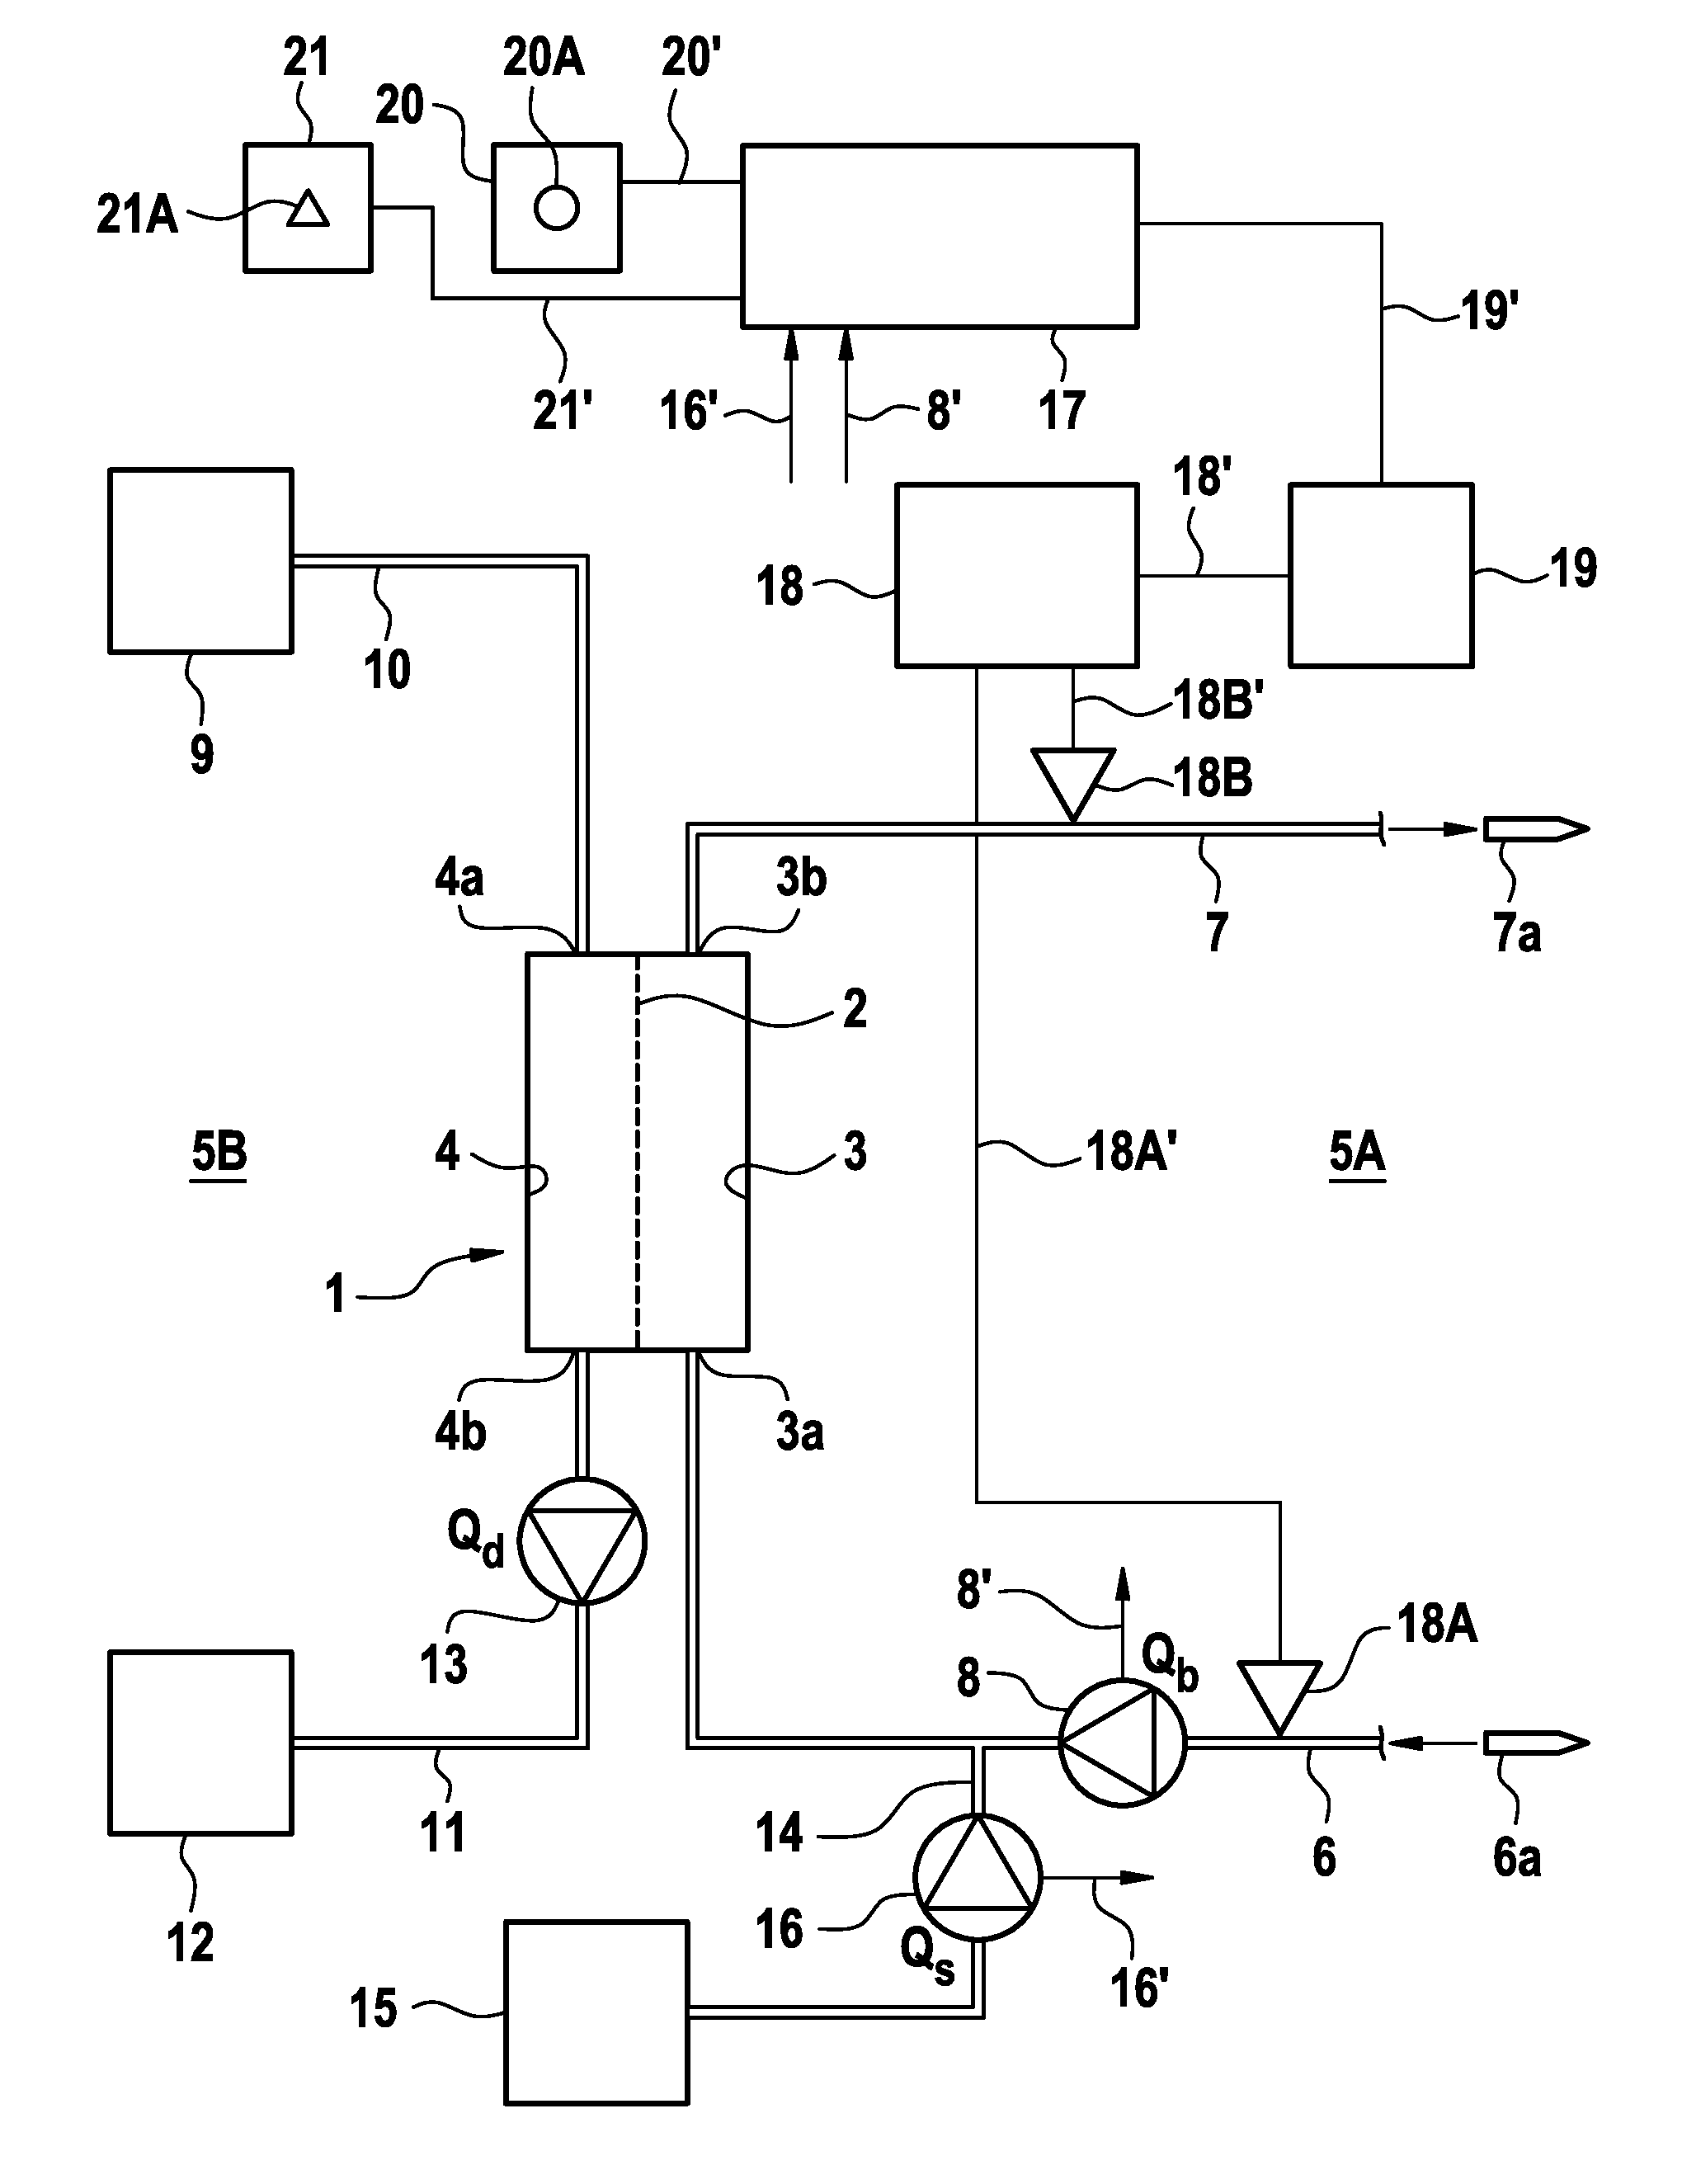 Device and Method for Detecting the Recirculation During an Extracorporeal Blood Treatment